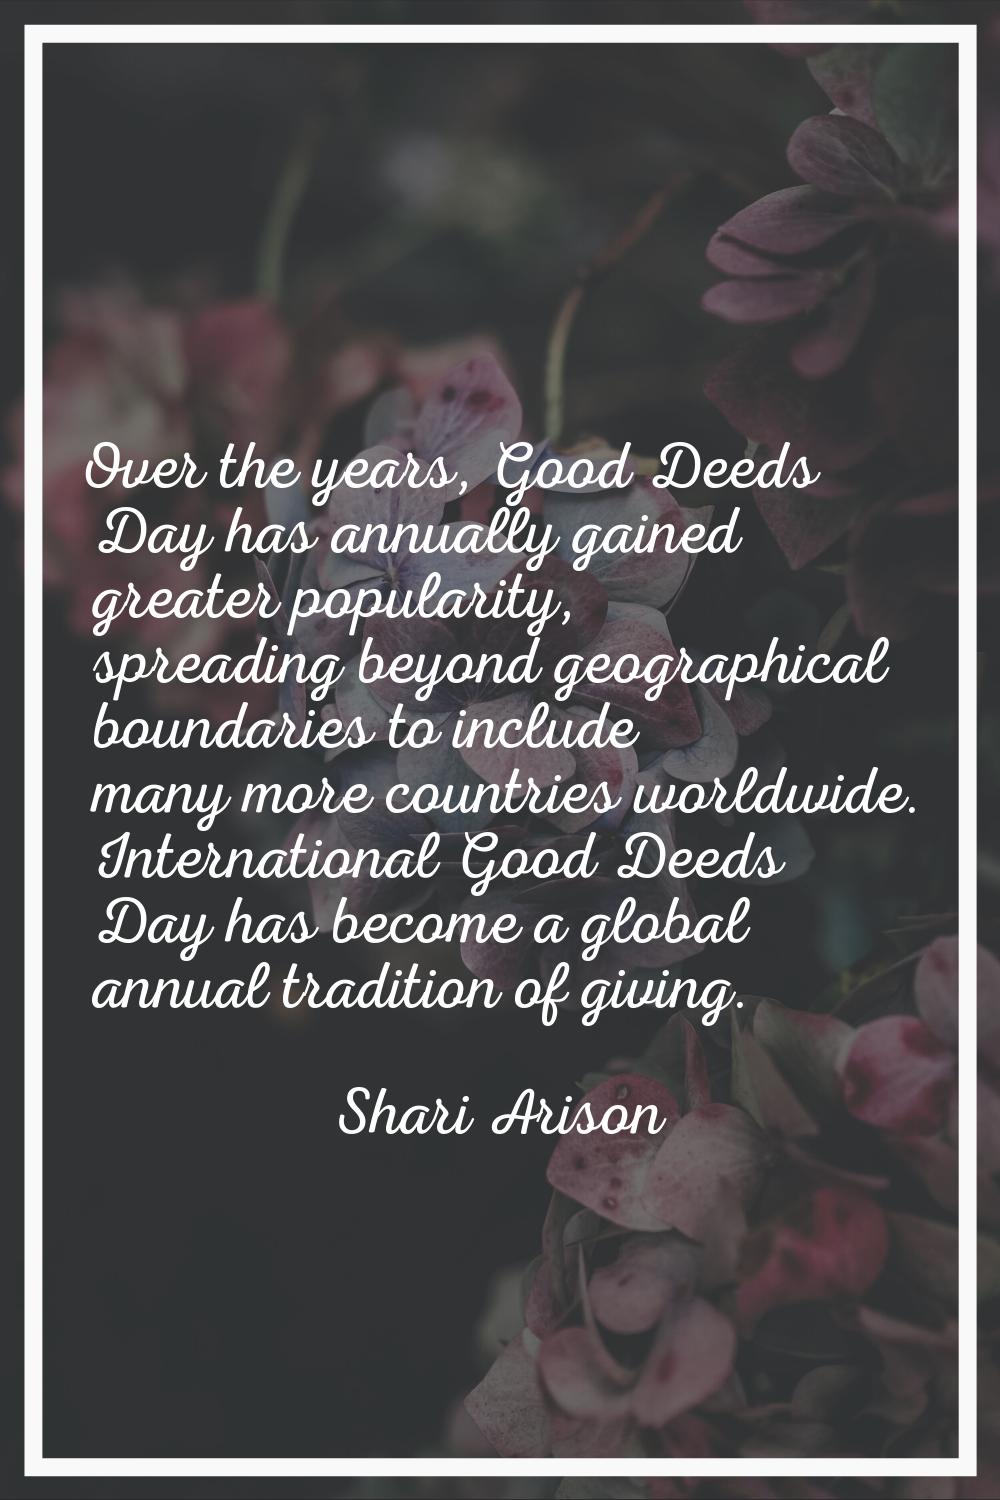 Over the years, Good Deeds Day has annually gained greater popularity, spreading beyond geographica